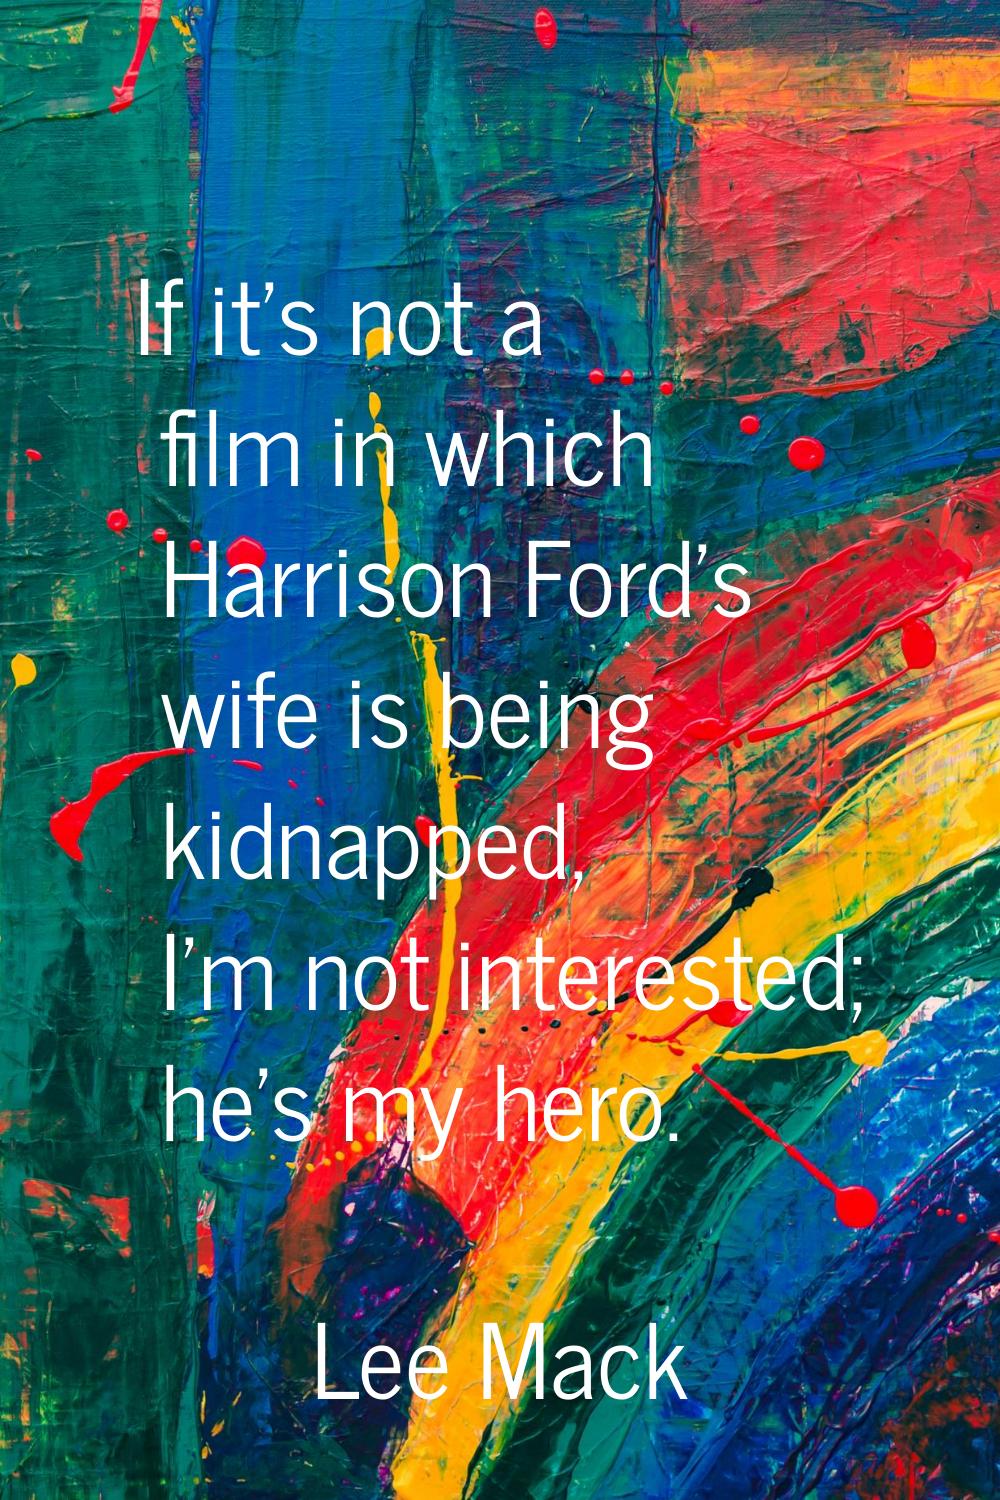 If it's not a film in which Harrison Ford's wife is being kidnapped, I'm not interested; he's my he